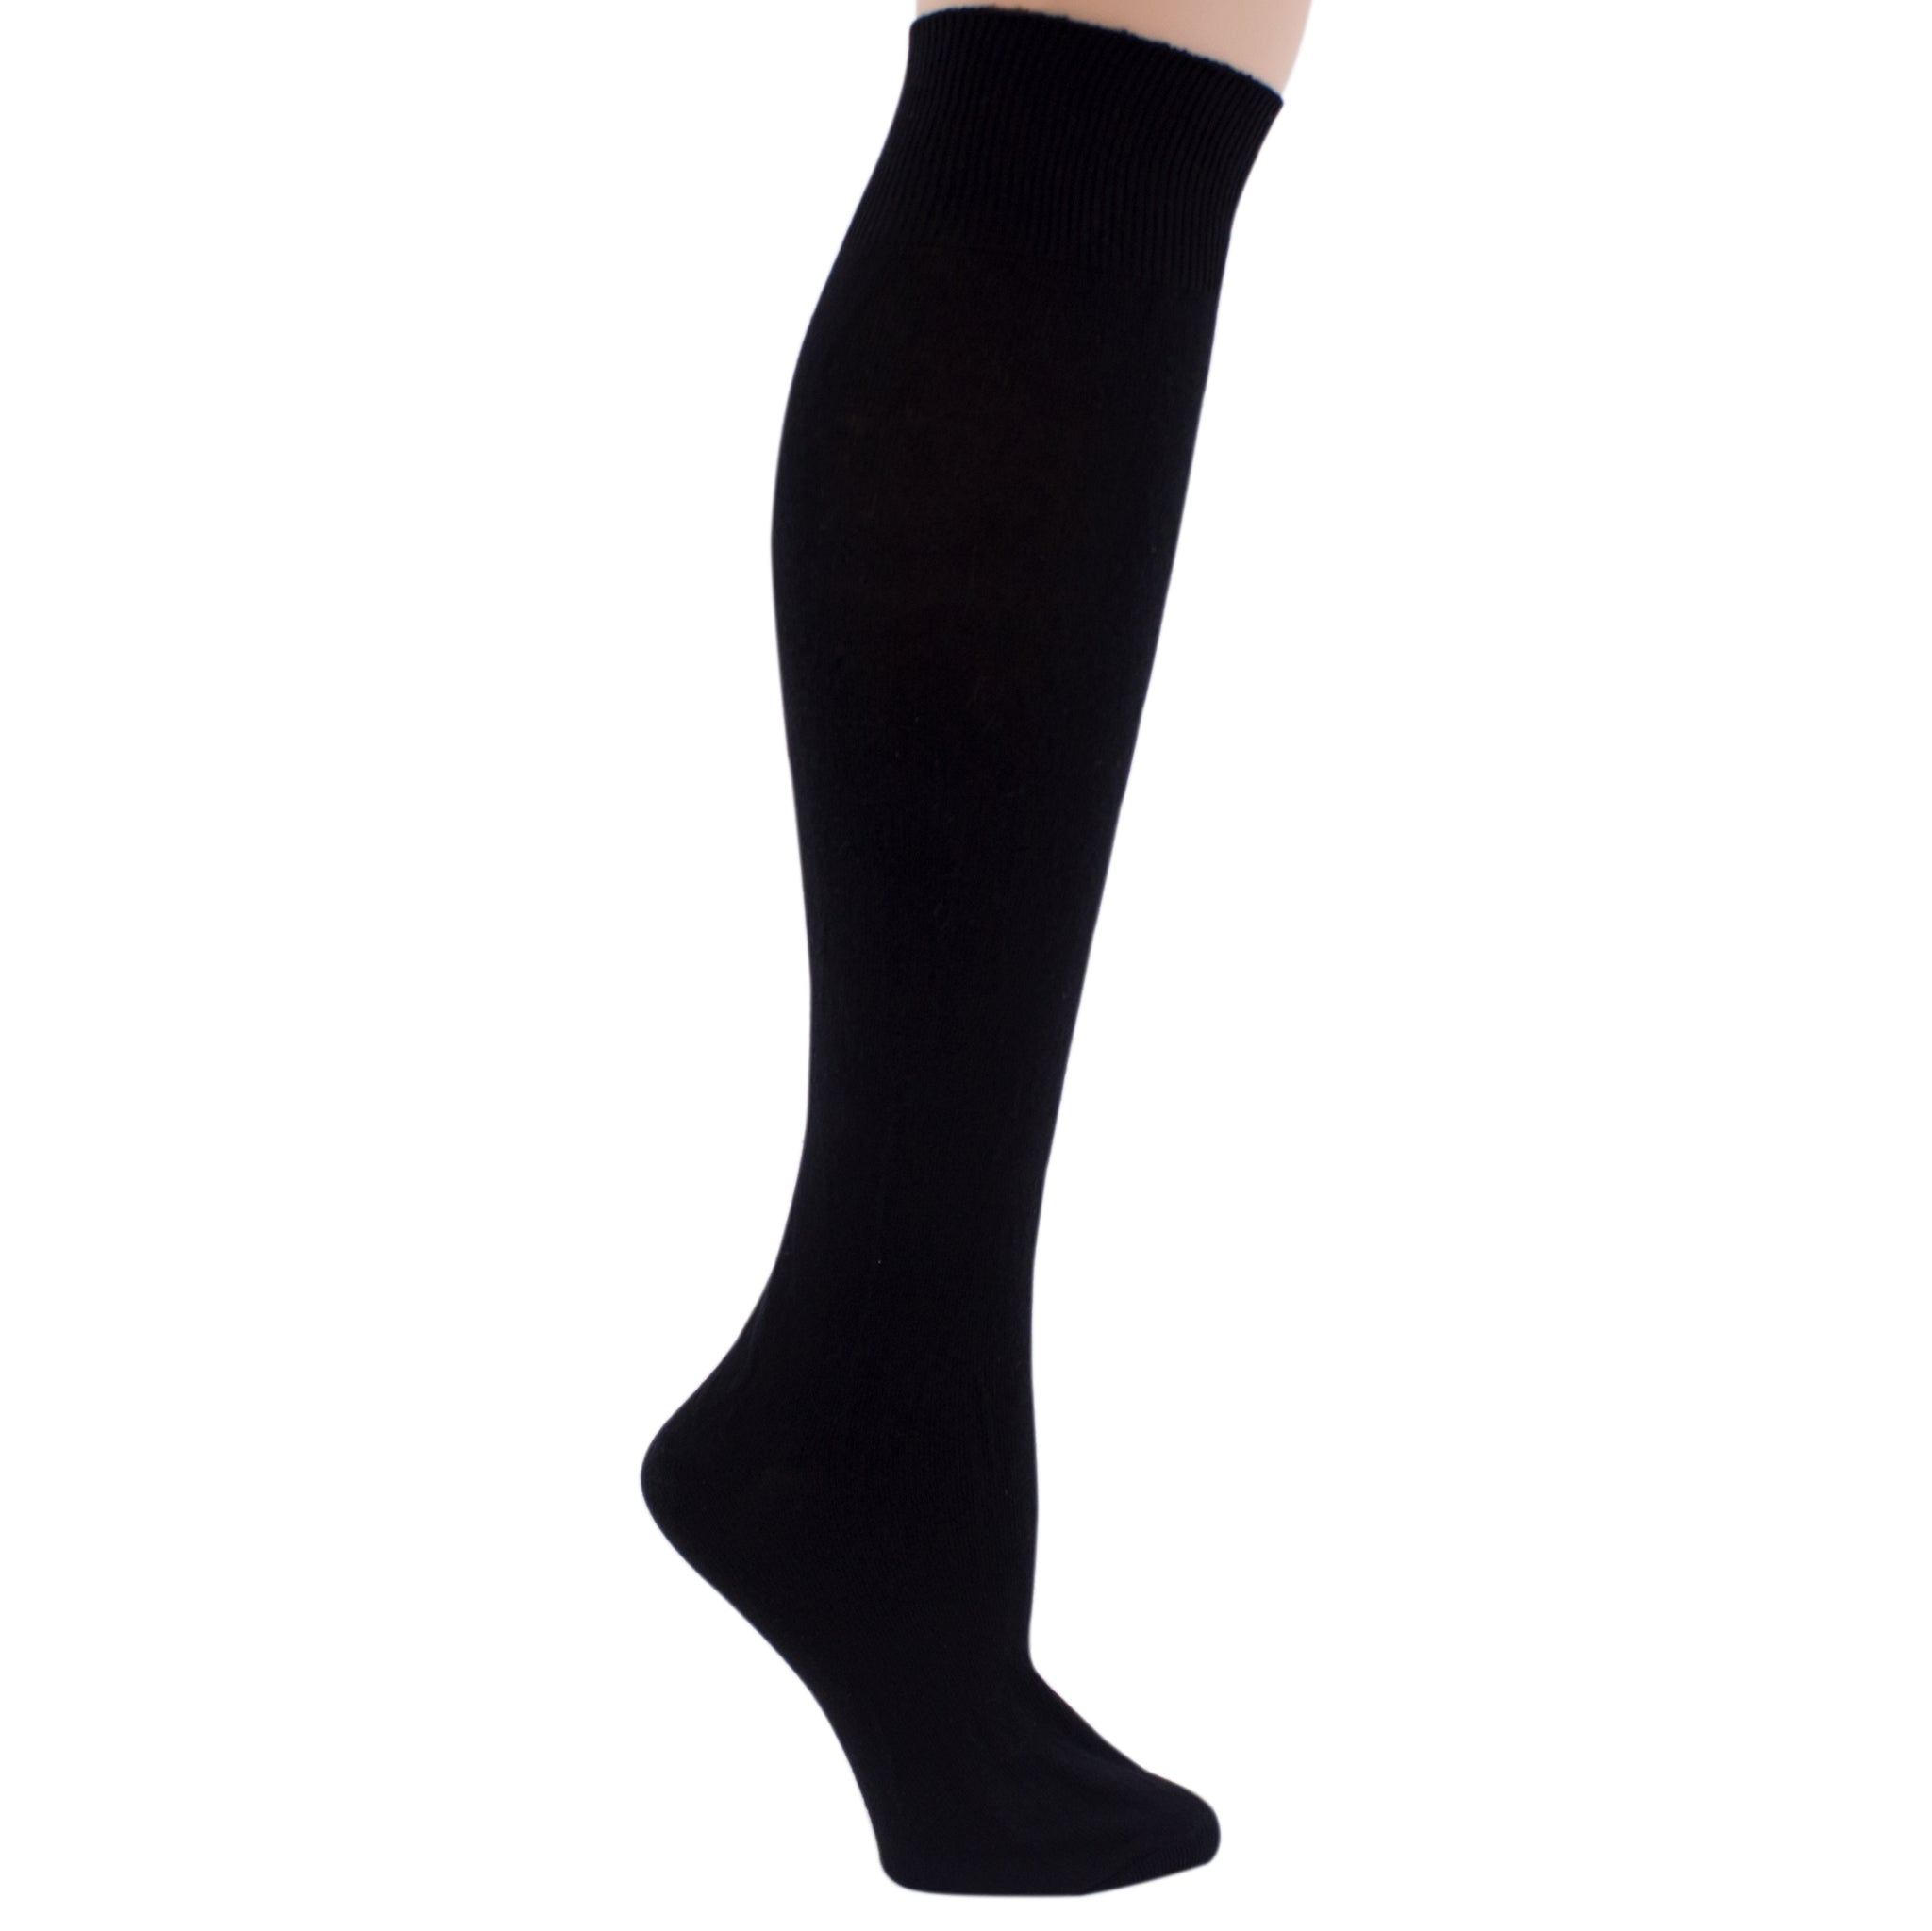 Kaylee Fishnet Tights (Black) - Laura's Boutique, Inc